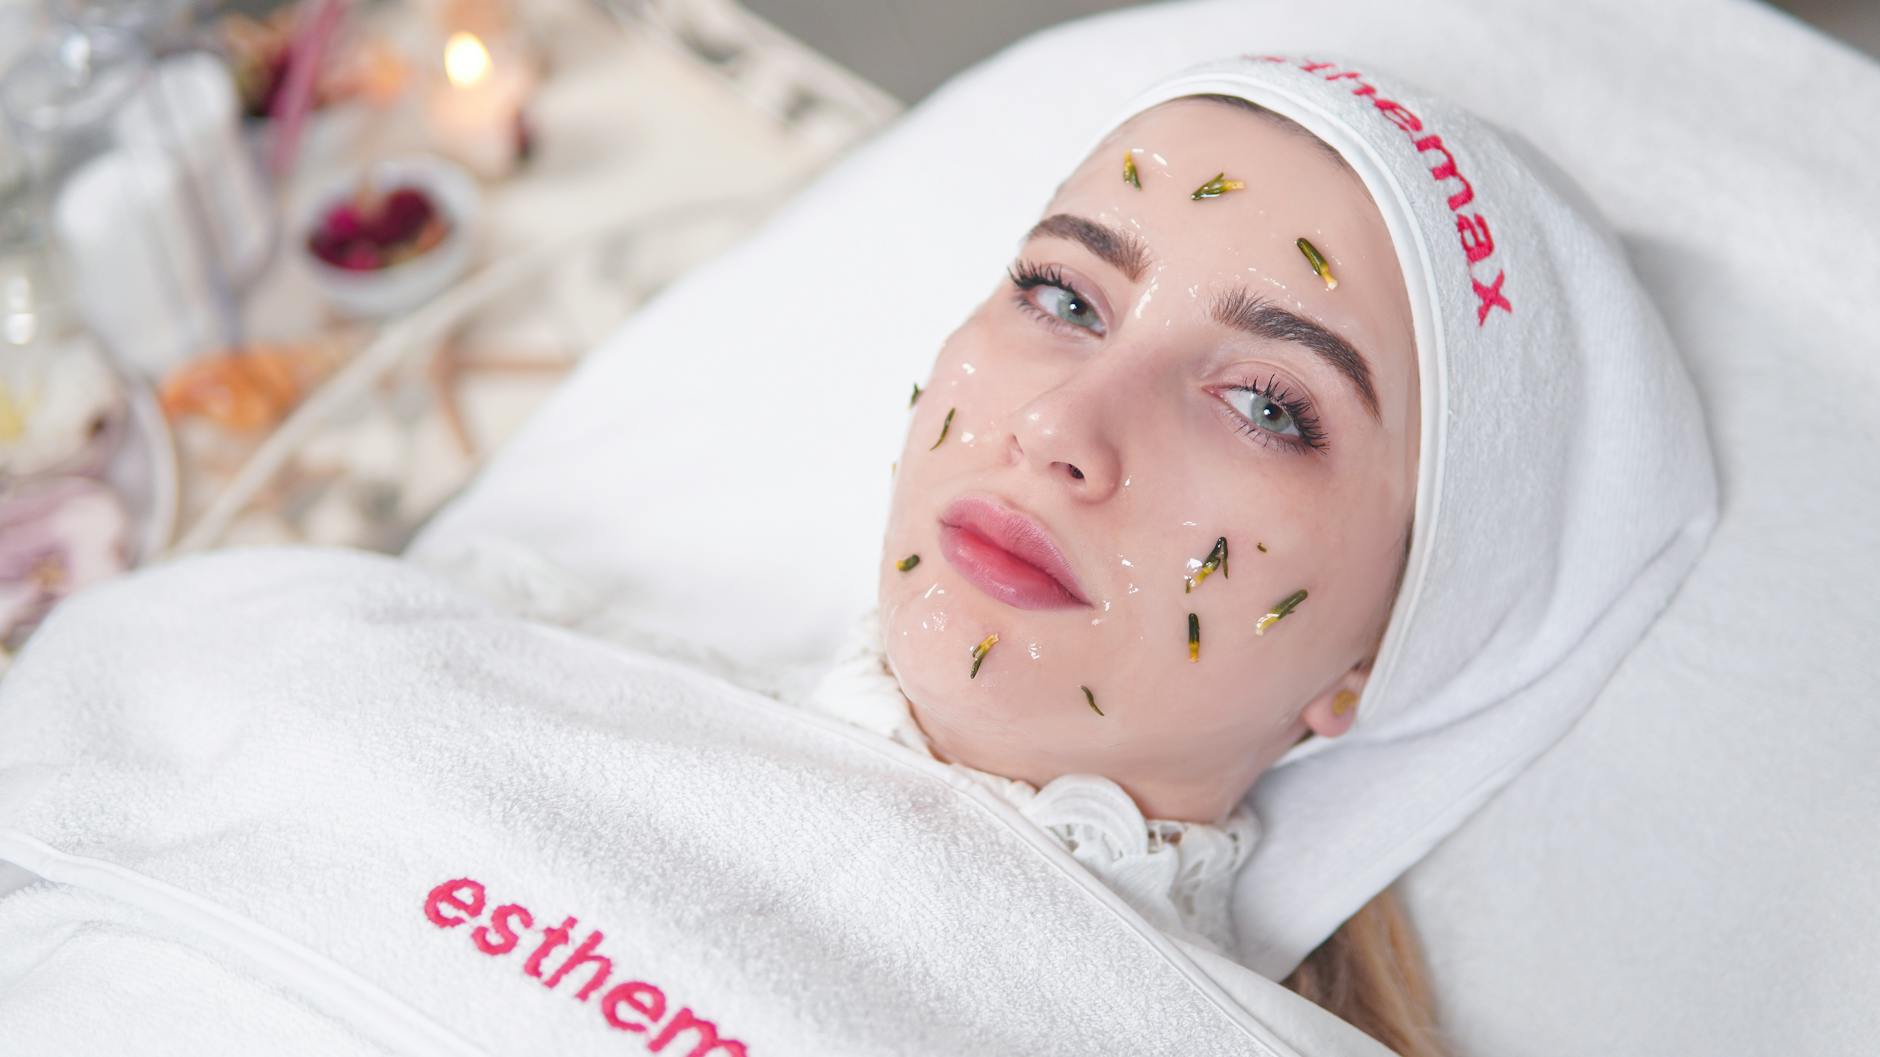 Woman Getting a Skincare Treatment